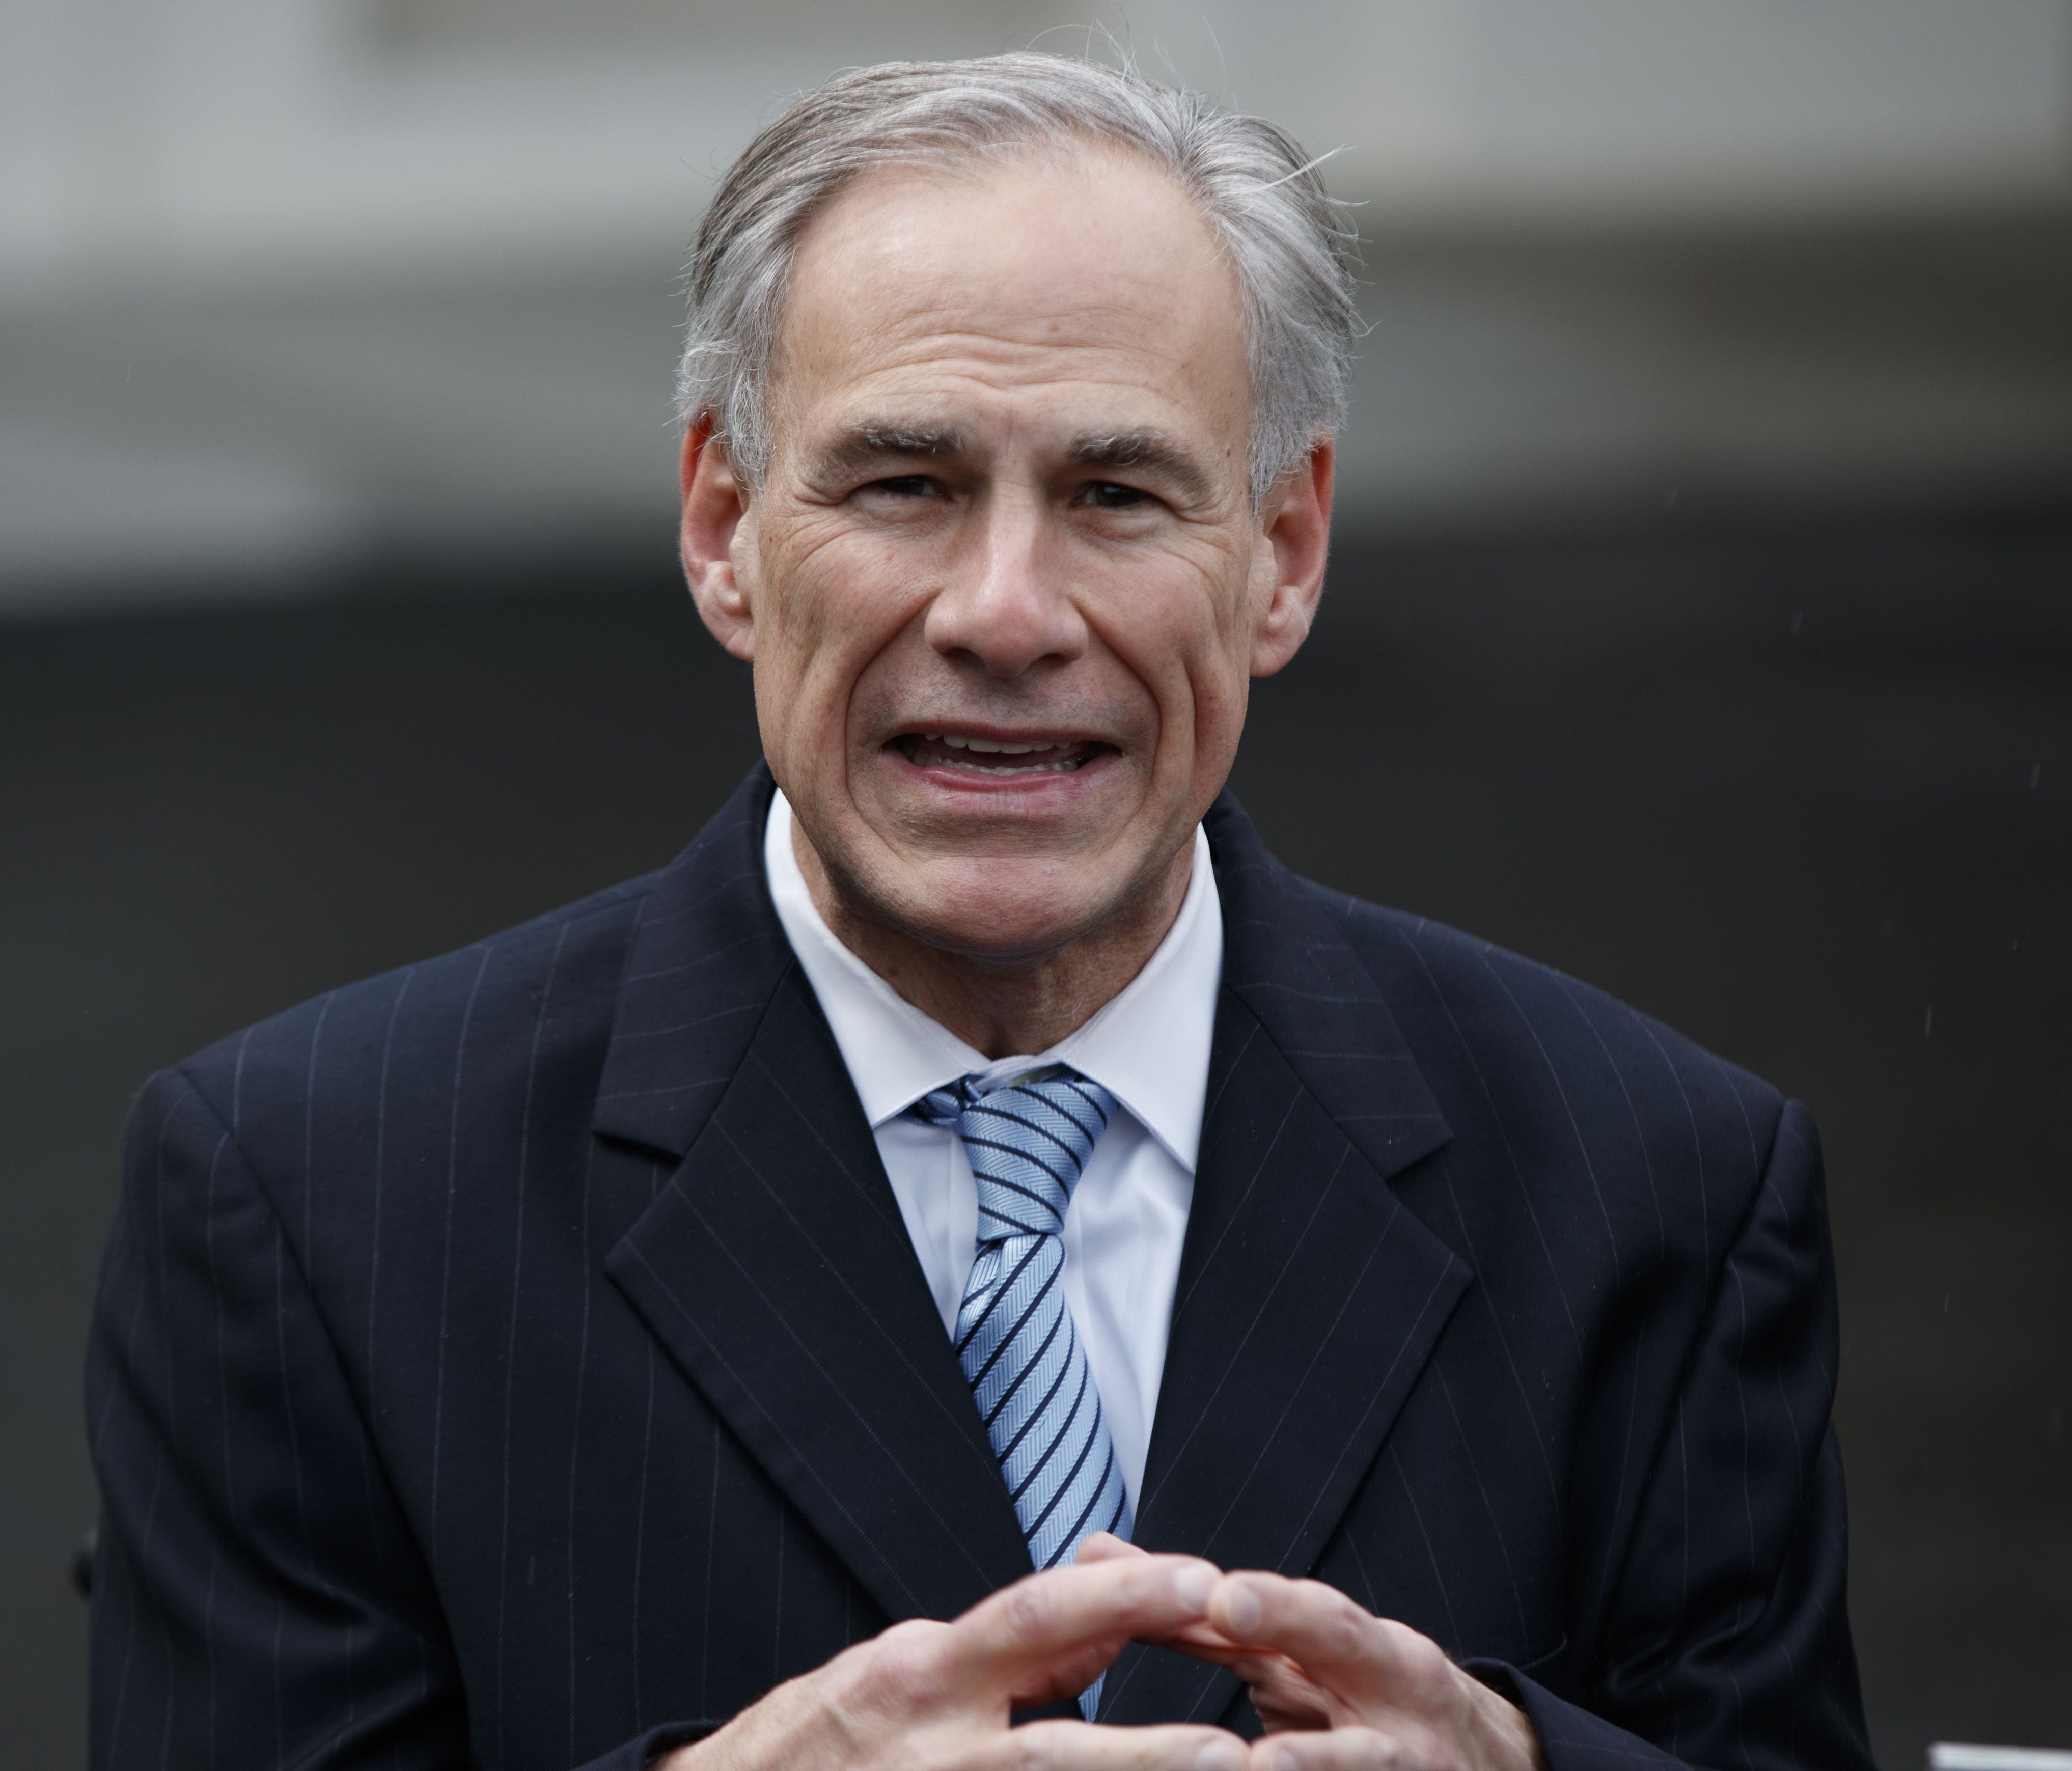 FILE - In this March 24, 2017, file photo, Texas Gov. Greg Abbott talks to reporters outside the White House in Washington.